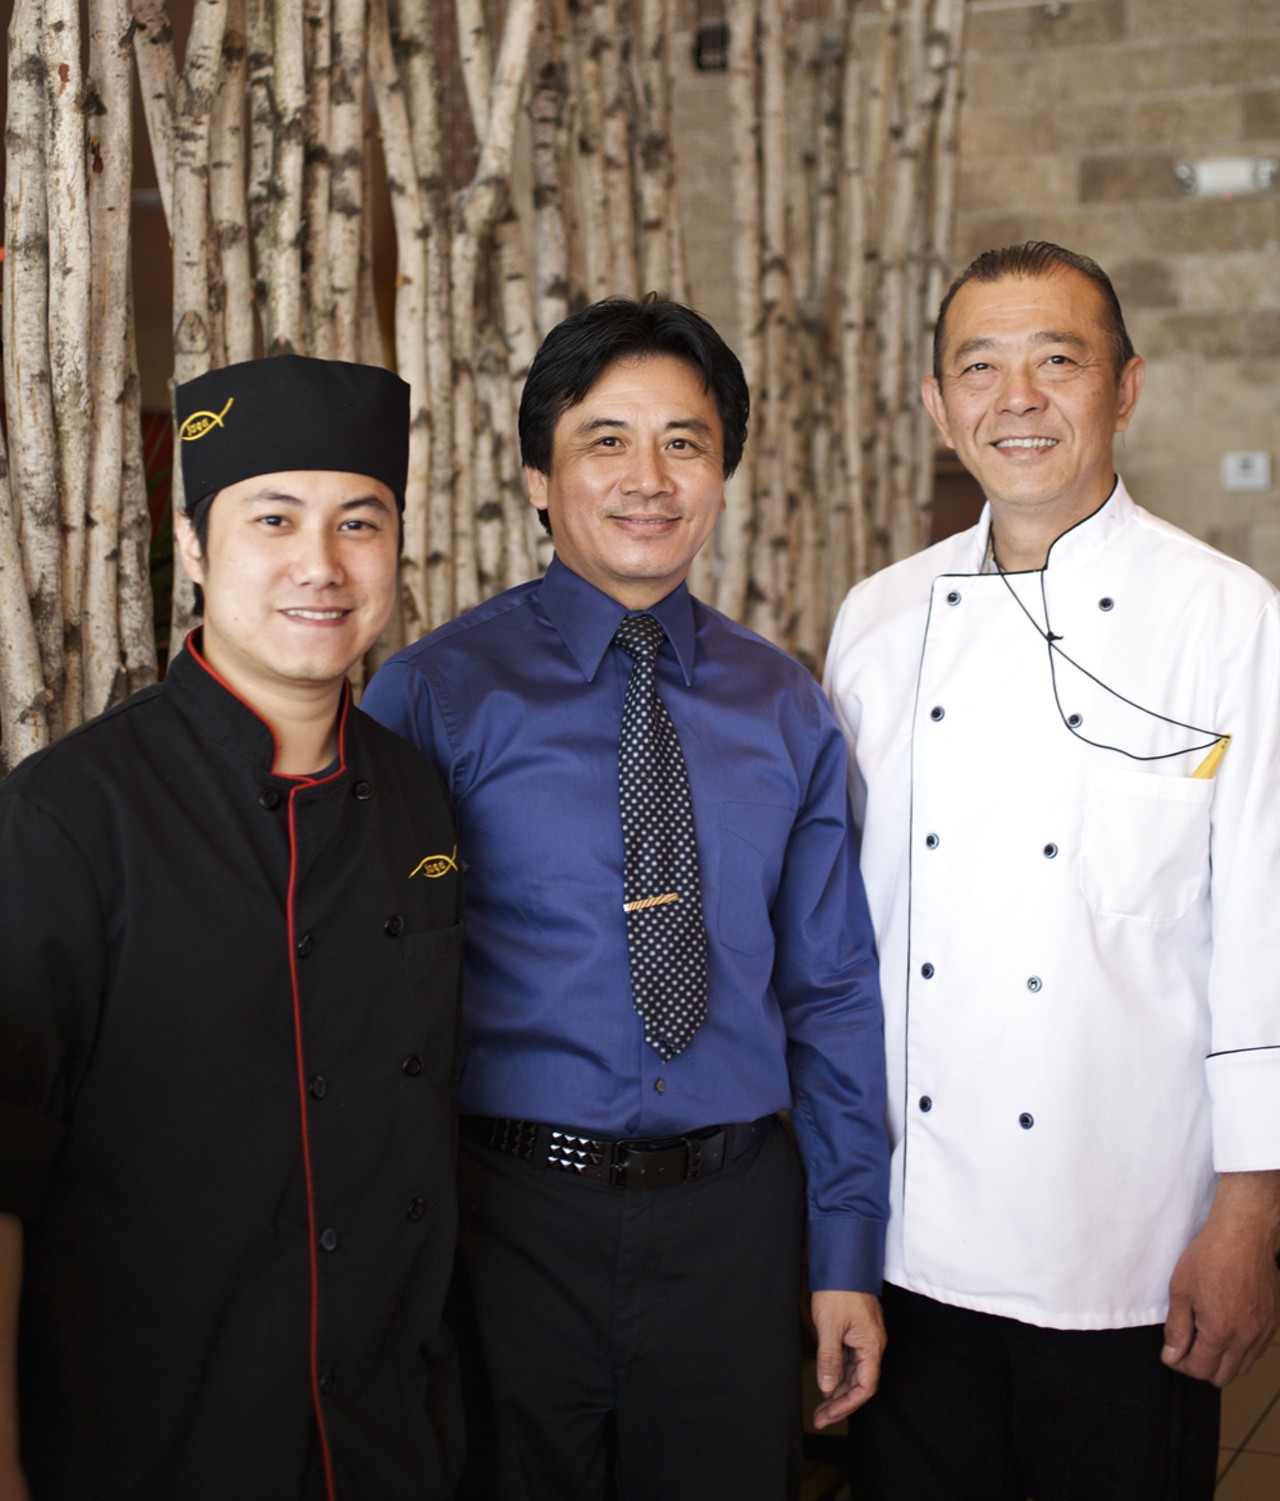 Left to right, co-owner Tony Chen, co-owner Mike Liao and executive chef Anthonie Chin.